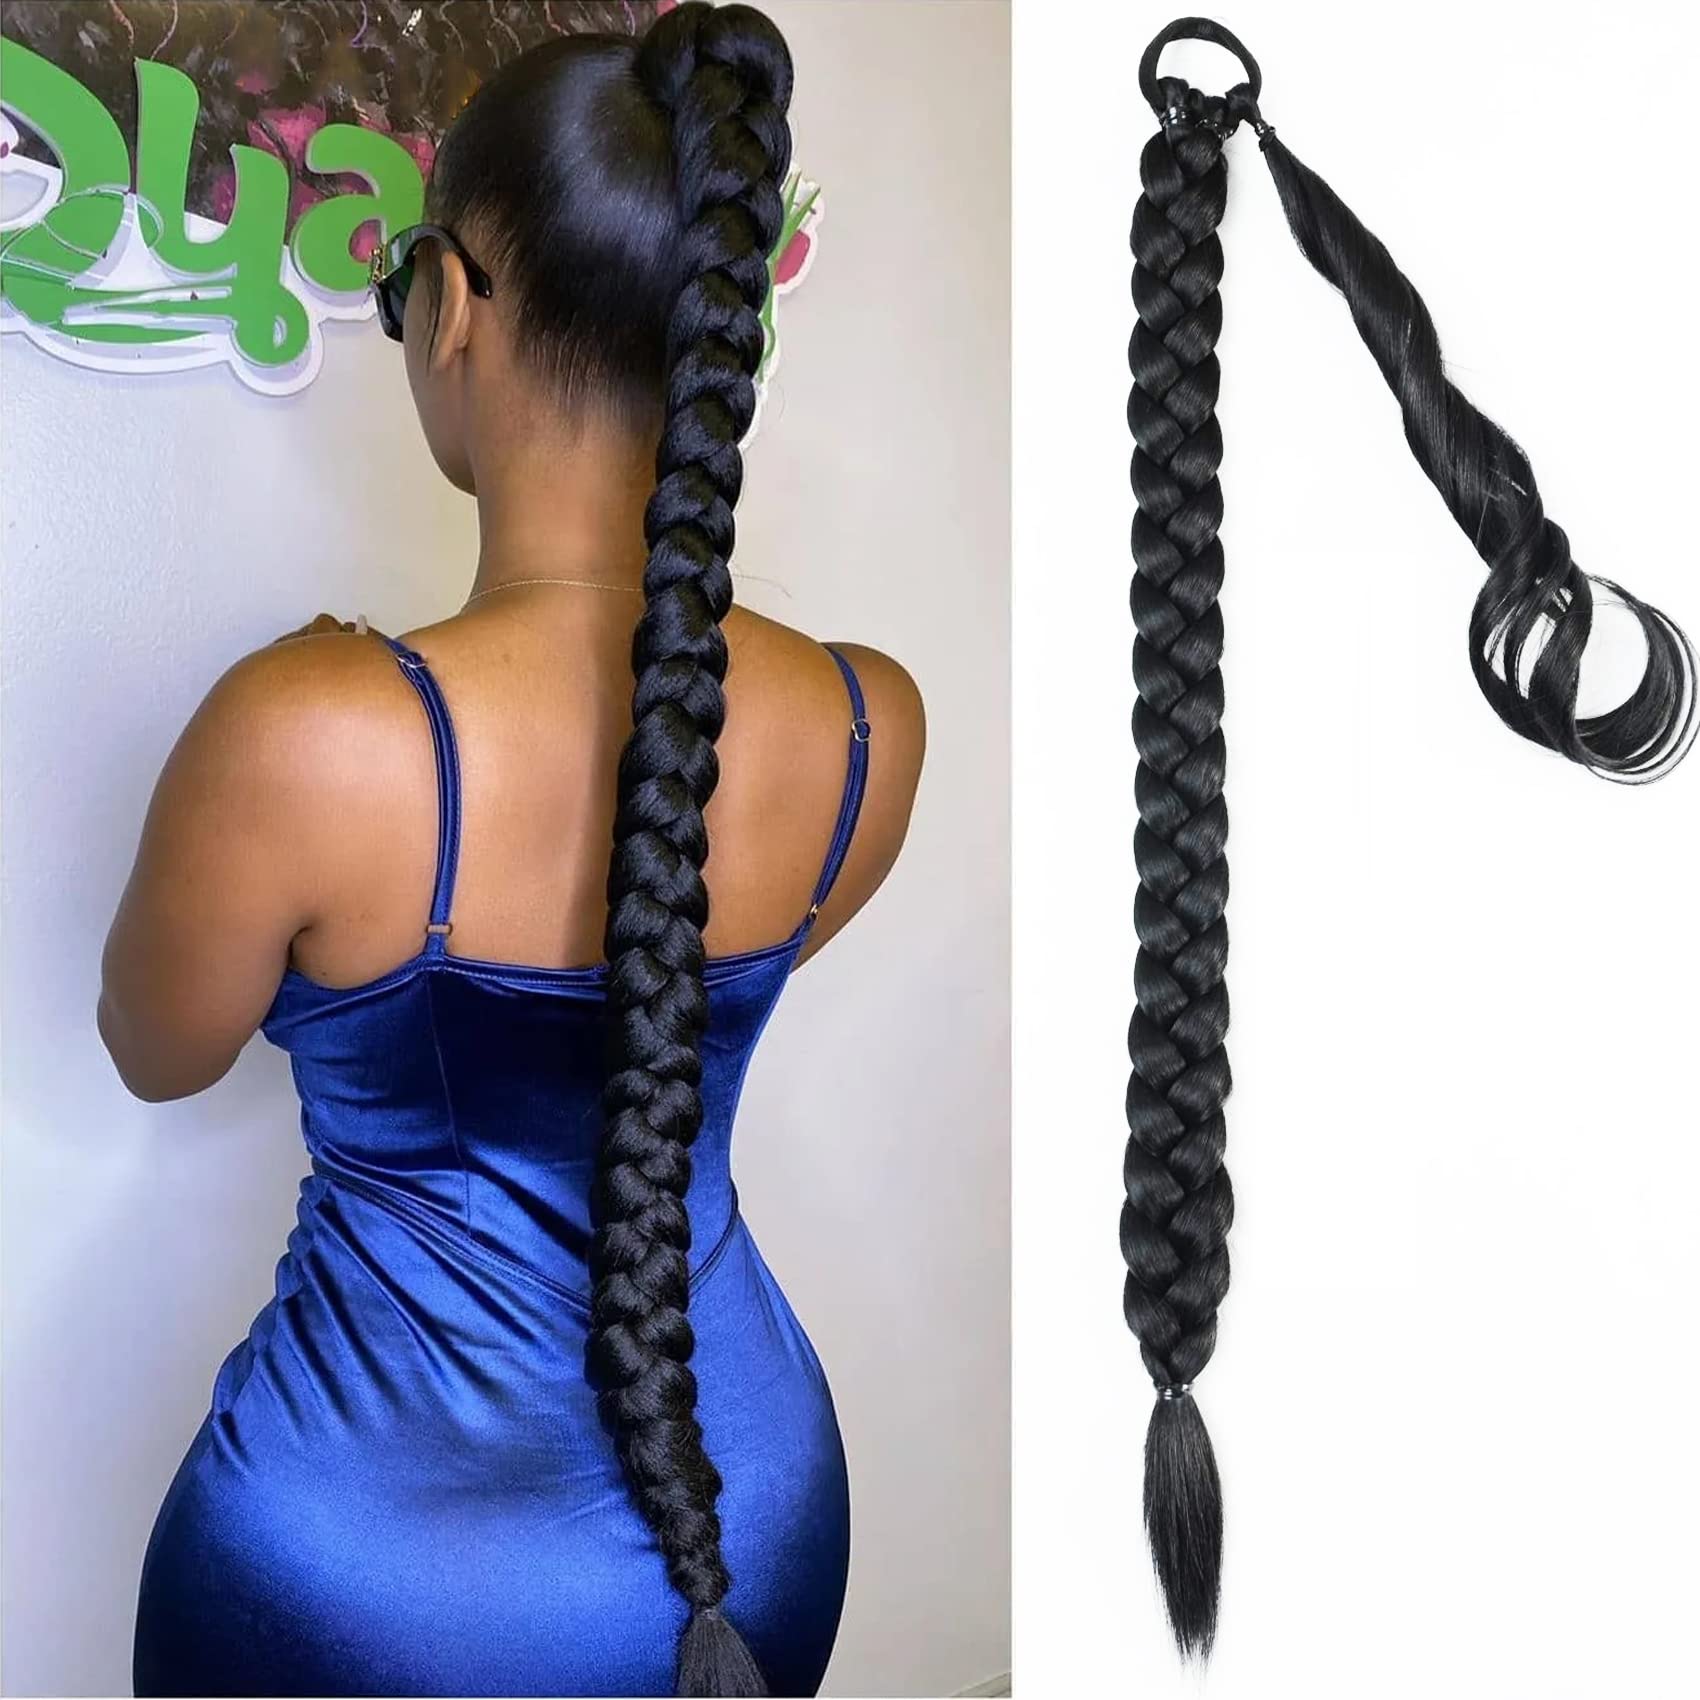 24 Inch Long Braided Ponytail Extension with Hair Tie Braided